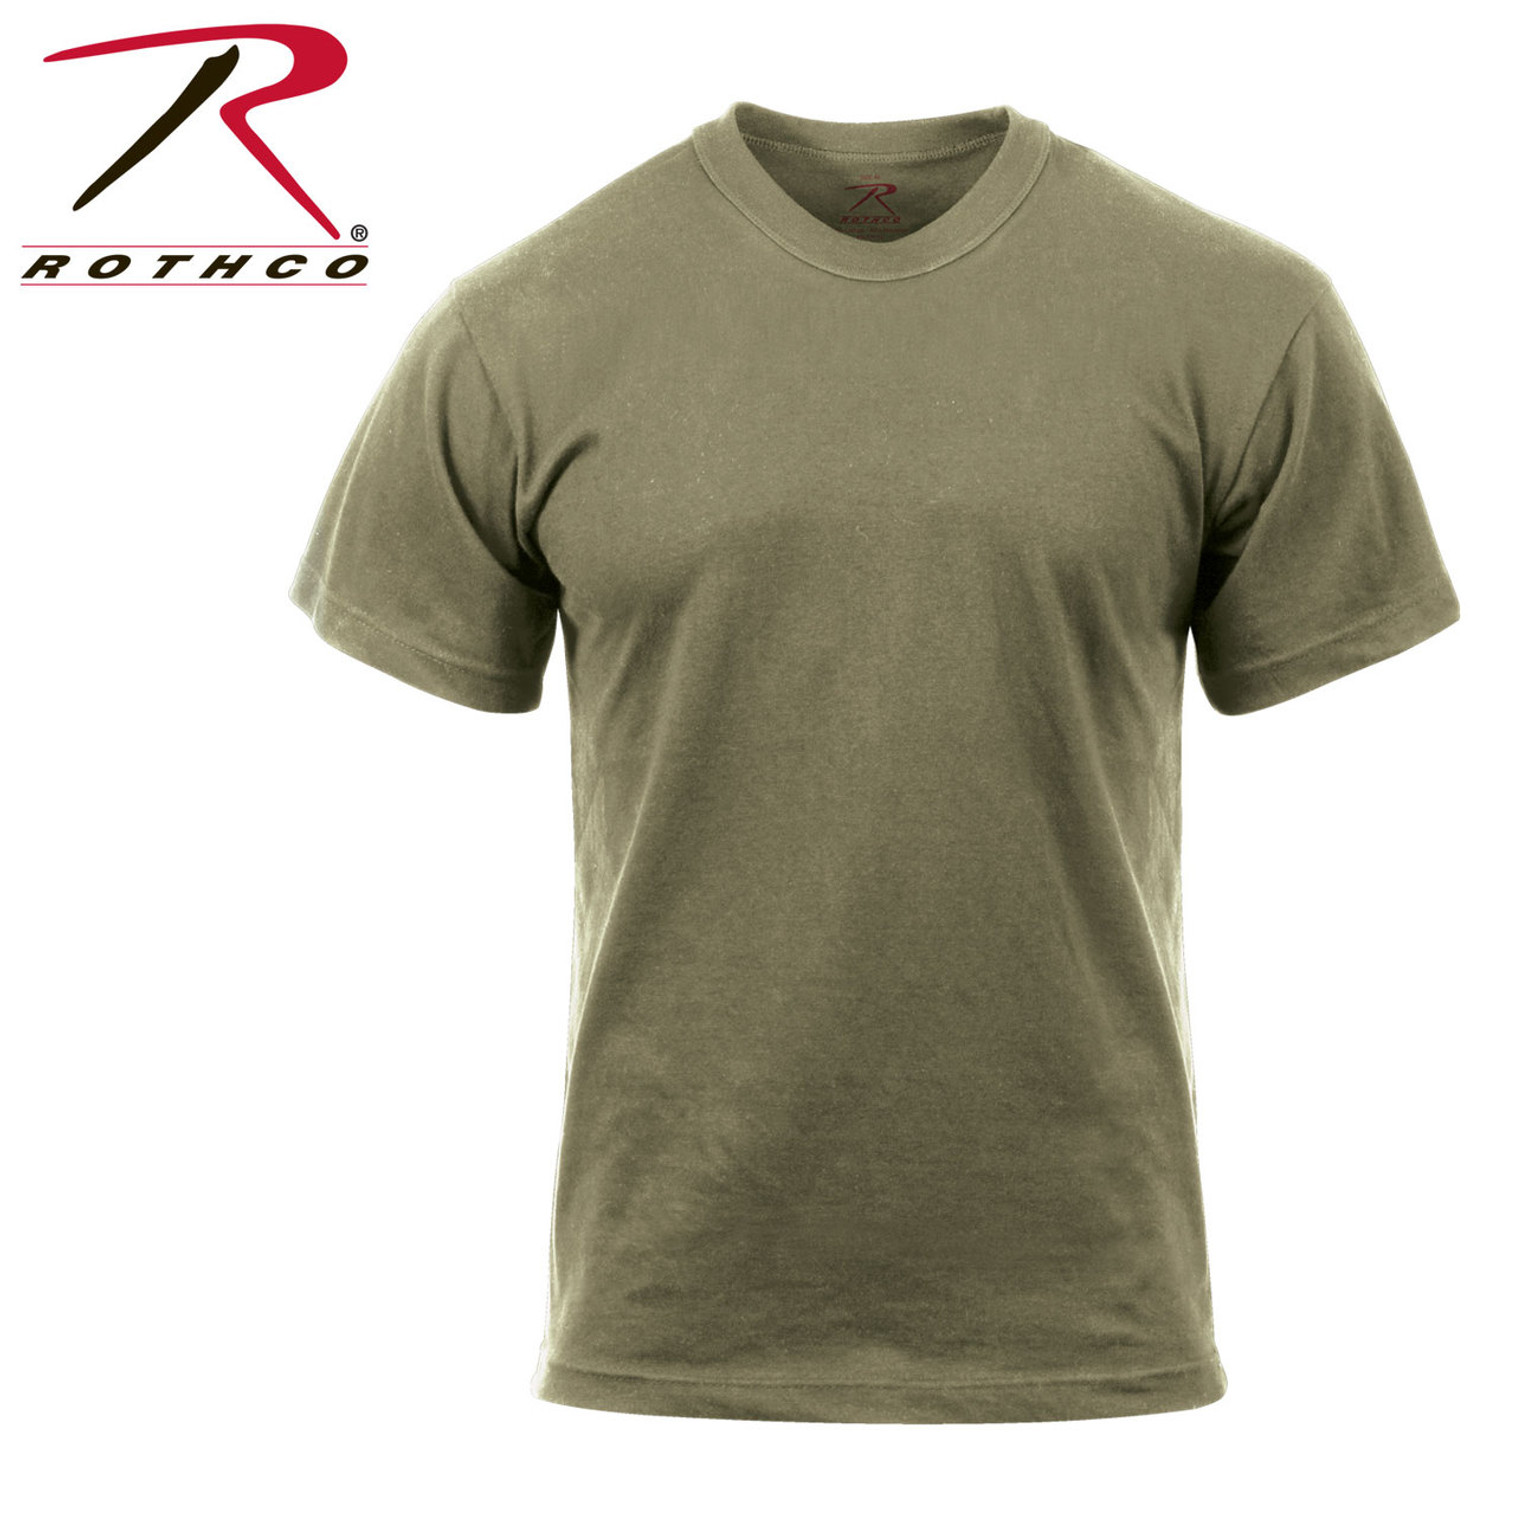 Rothco Solid Color 100% Cotton T-Shirt - AR 670-1 Coyote Brown